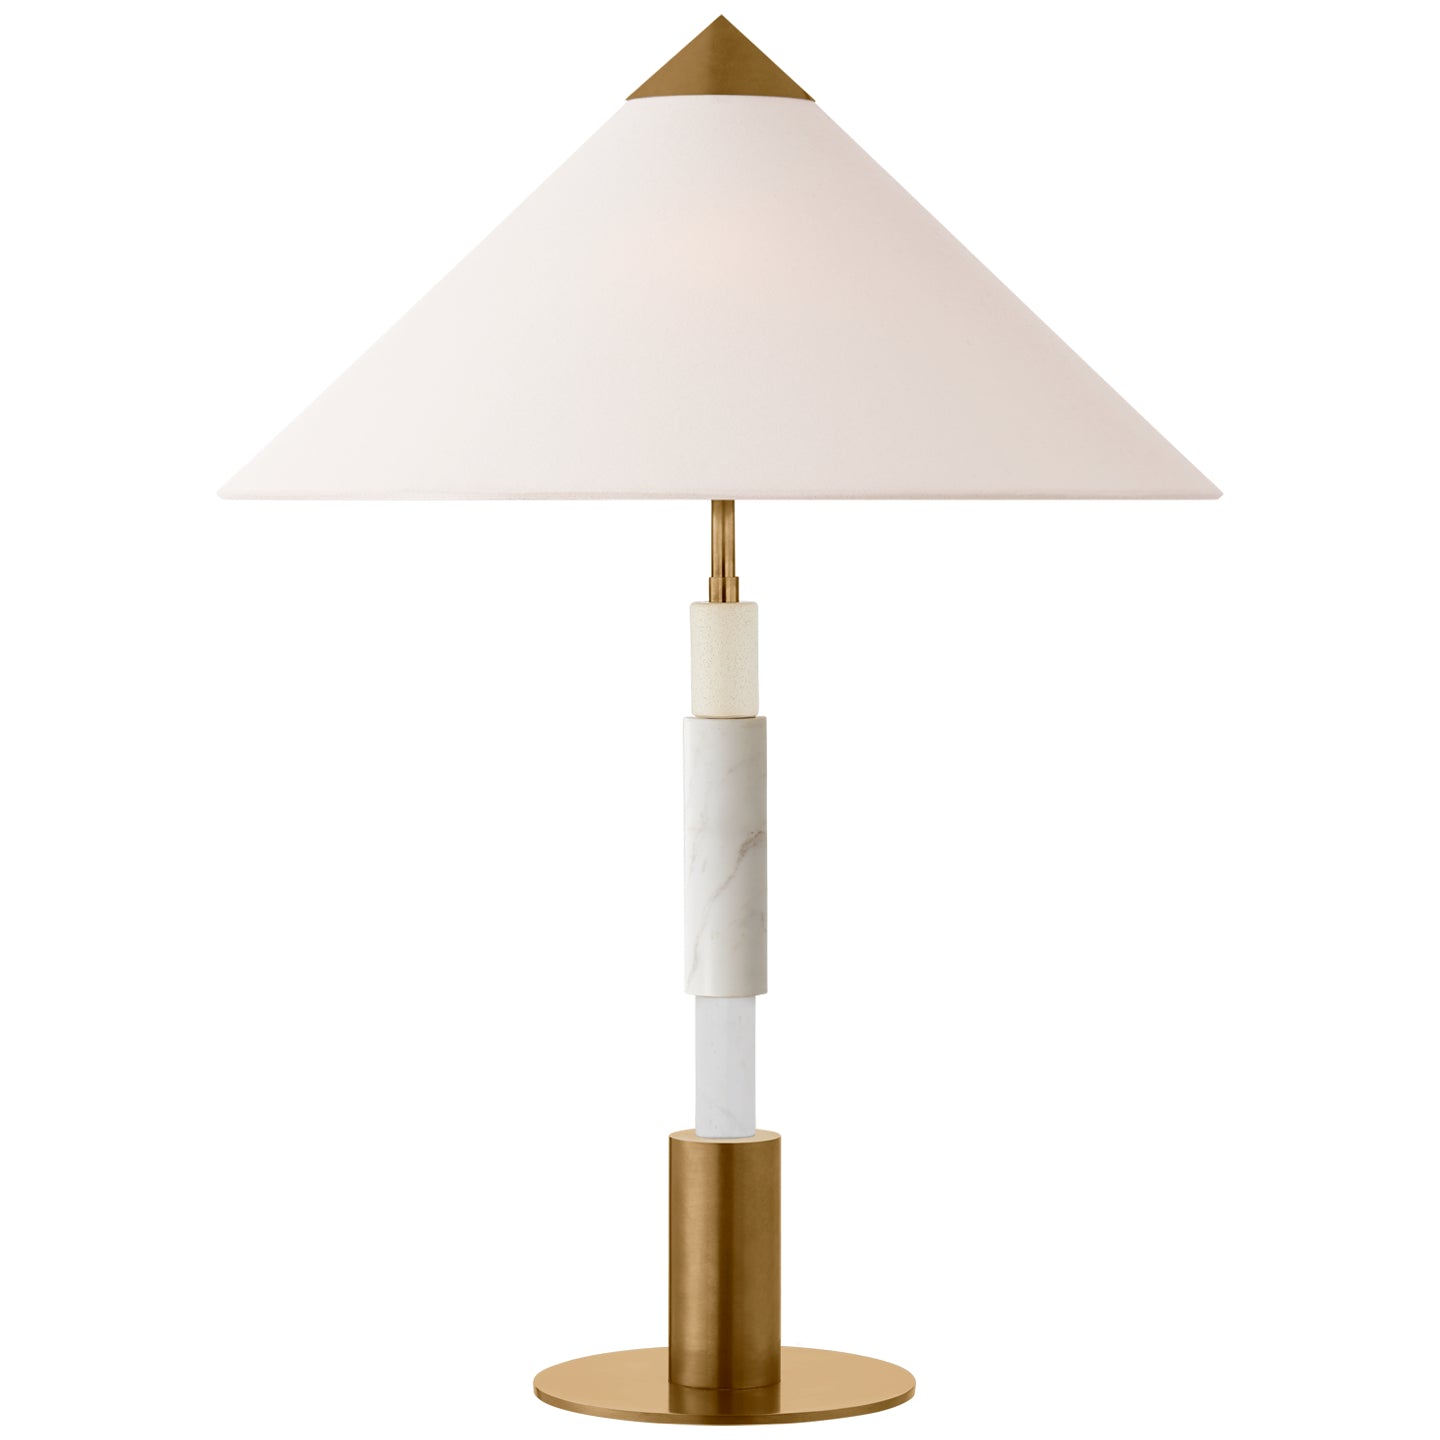 Load image into Gallery viewer, Visual Comfort Signature - KW 3607AB/WM-L - LED Table Lamp - Mira - Antique-Burnished Brass and White Marble
